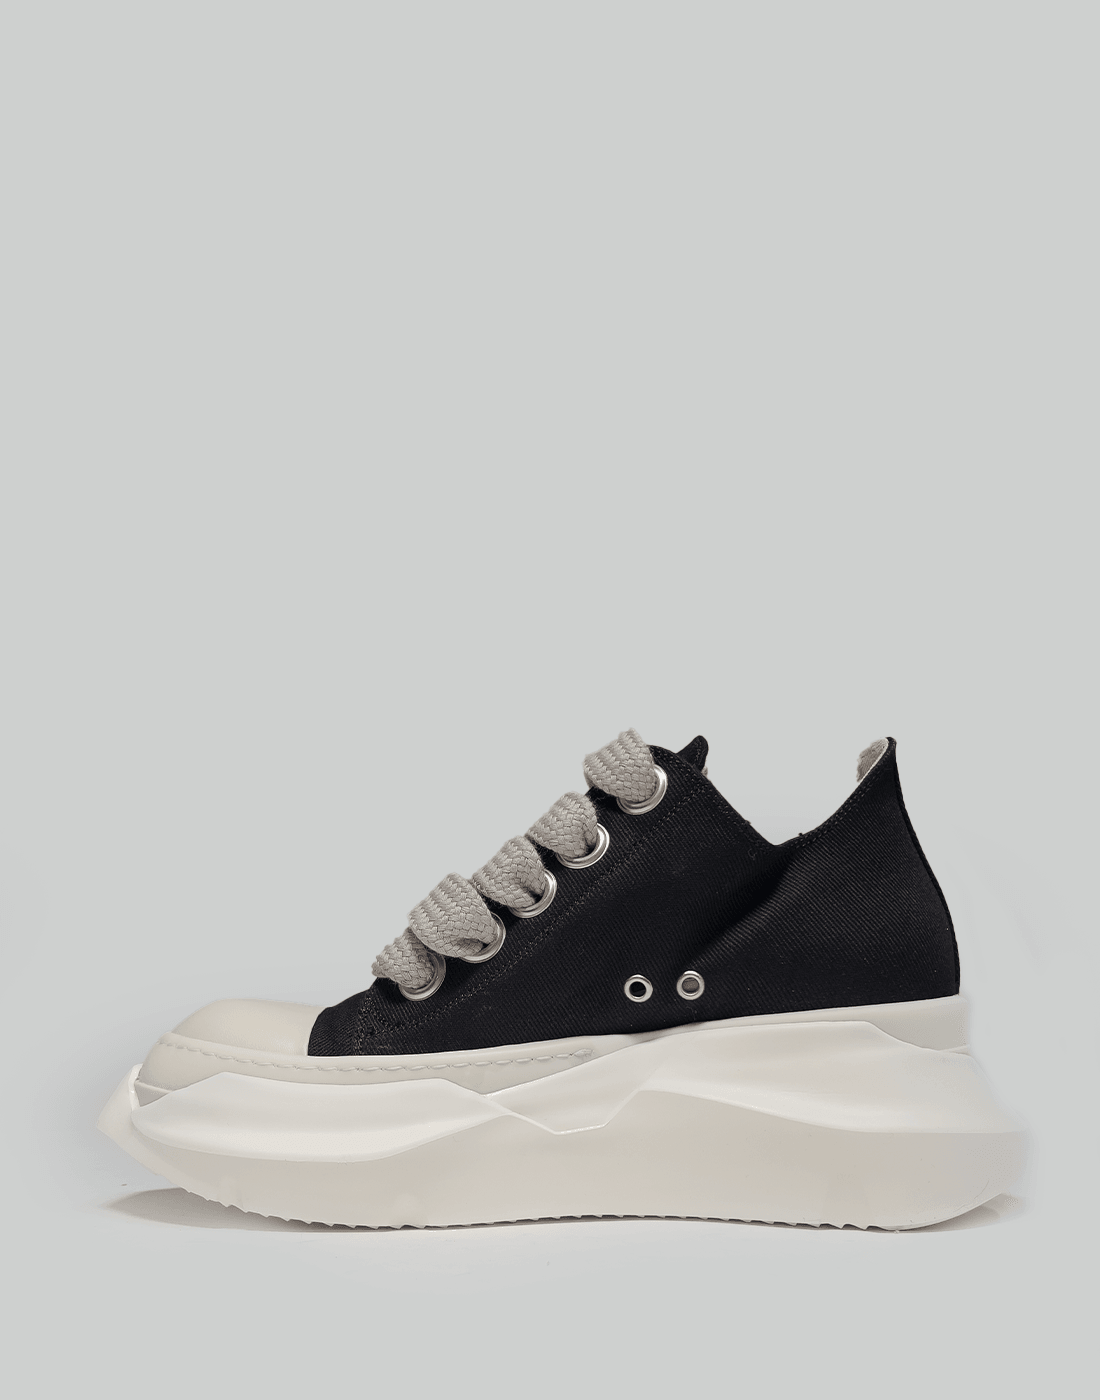 DRKSHDW ABSTRACT LOW 42.5 RICK OWENS